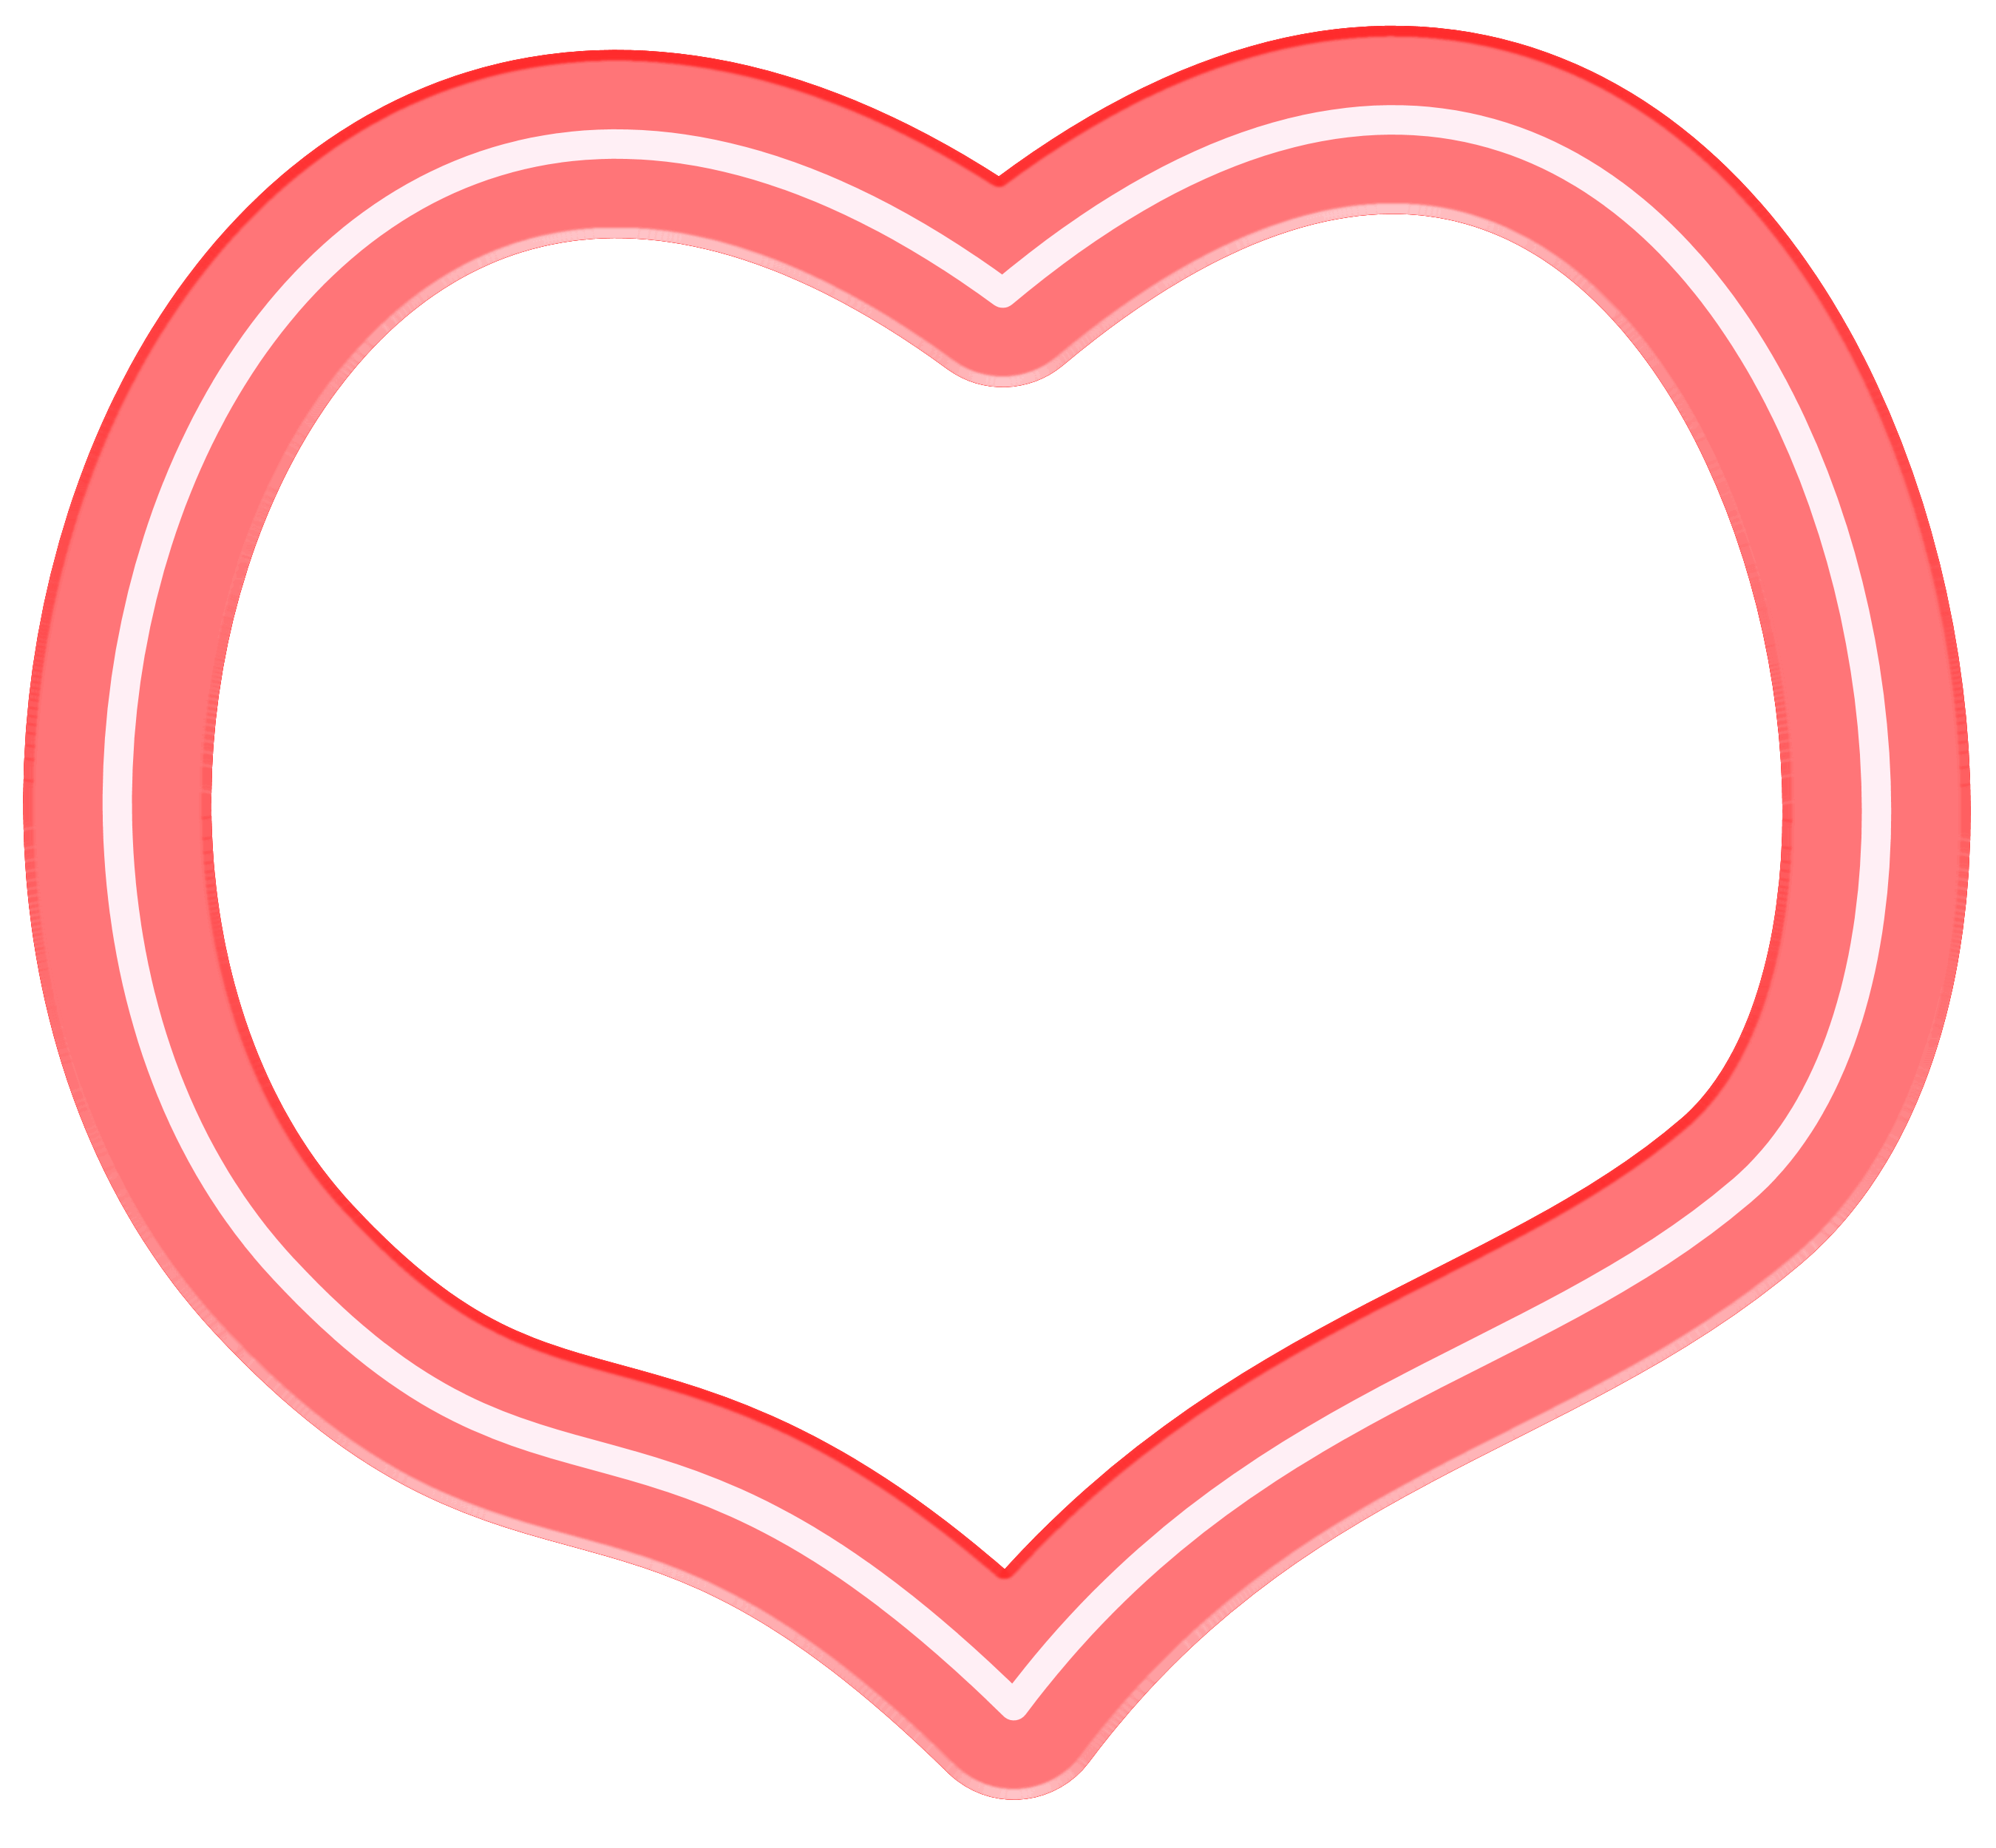 A Picture Of A Big Heart - Clipart library